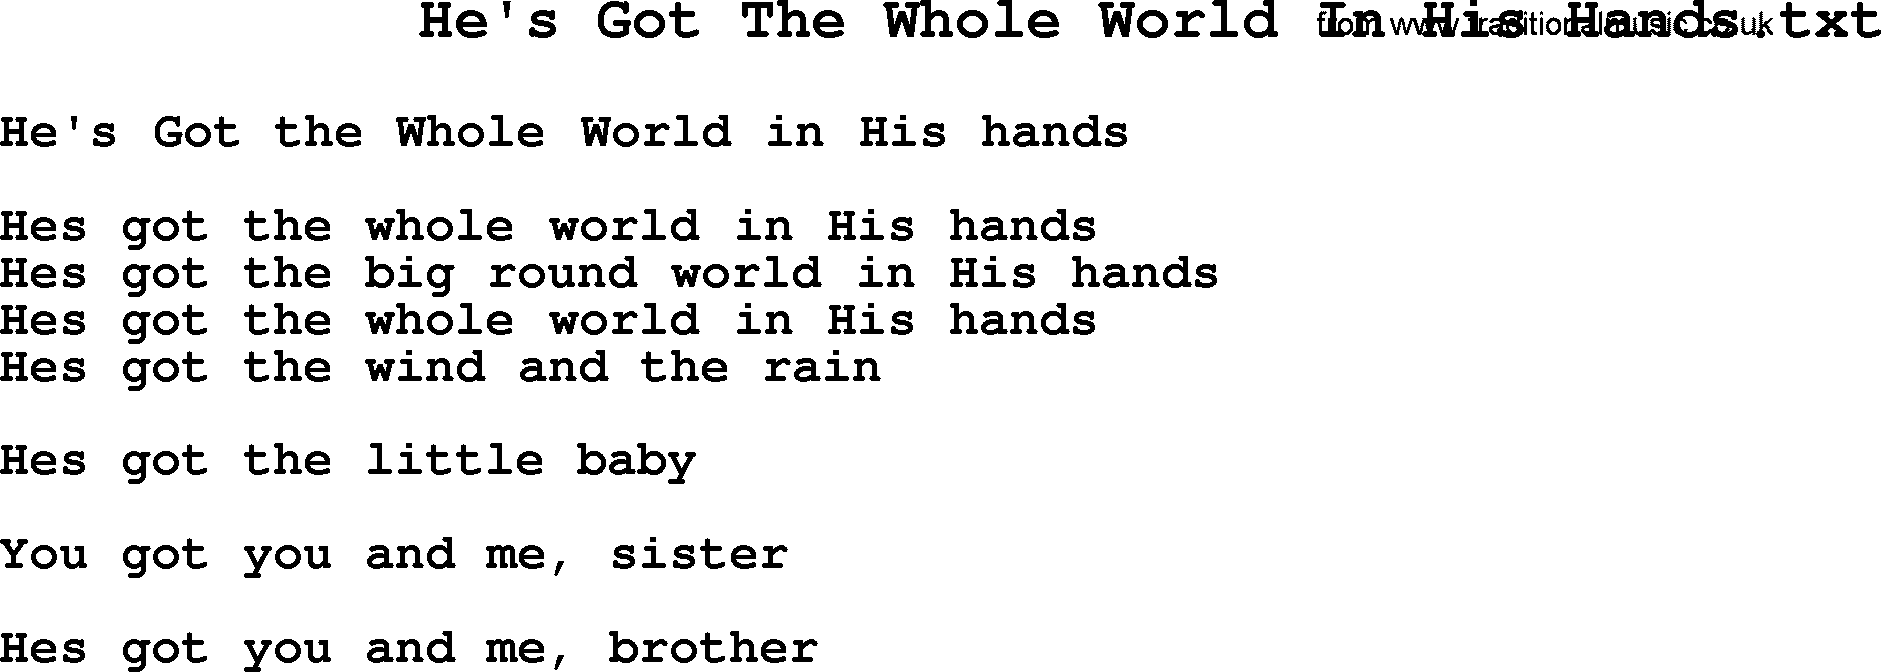 Negro Spiritual Song Lyrics for He's Got The Whole World In His Hands